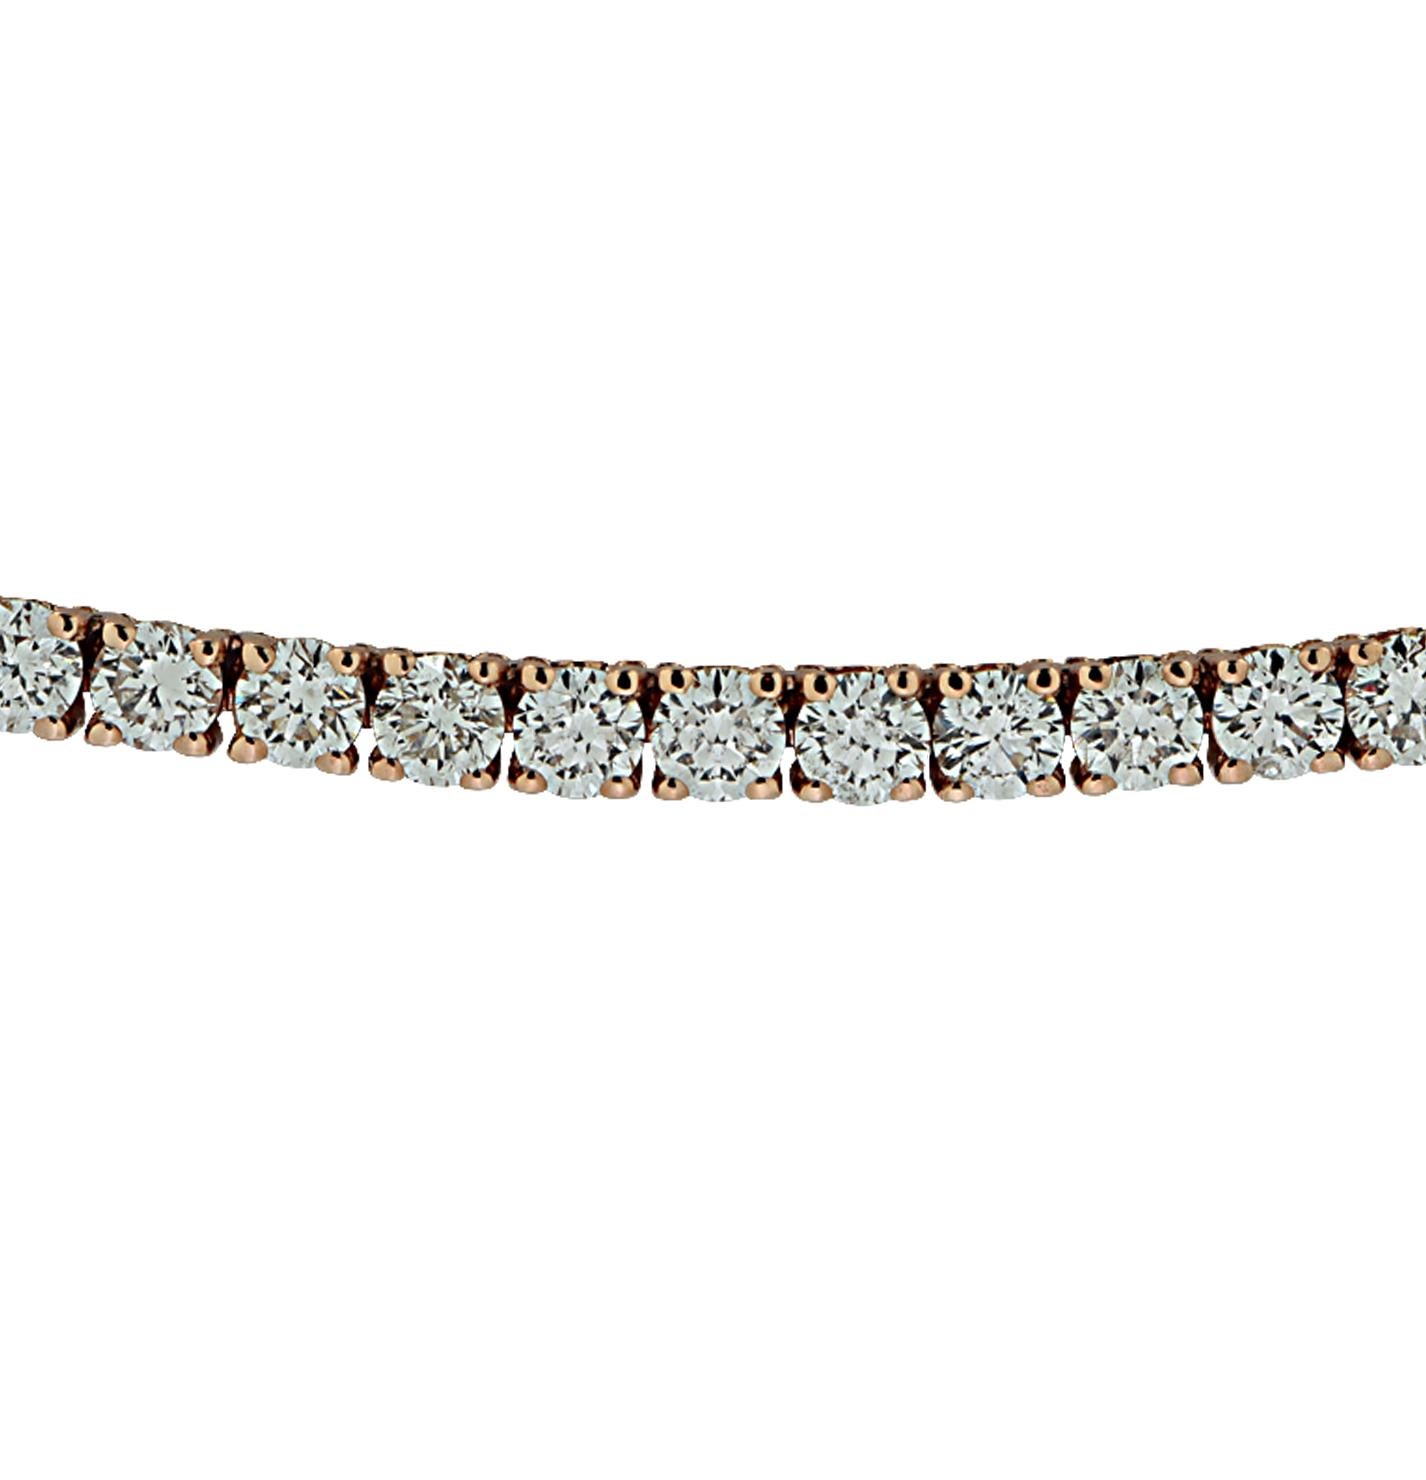 Exquisite Vivid Diamonds Straight Line diamond tennis necklace crafted in Rose Gold, showcasing 168 round brilliant cut diamonds weighing 6.42 carats total, G color, VS-SI Clarity. Each diamond was carefully selected, perfectly matched and set in a